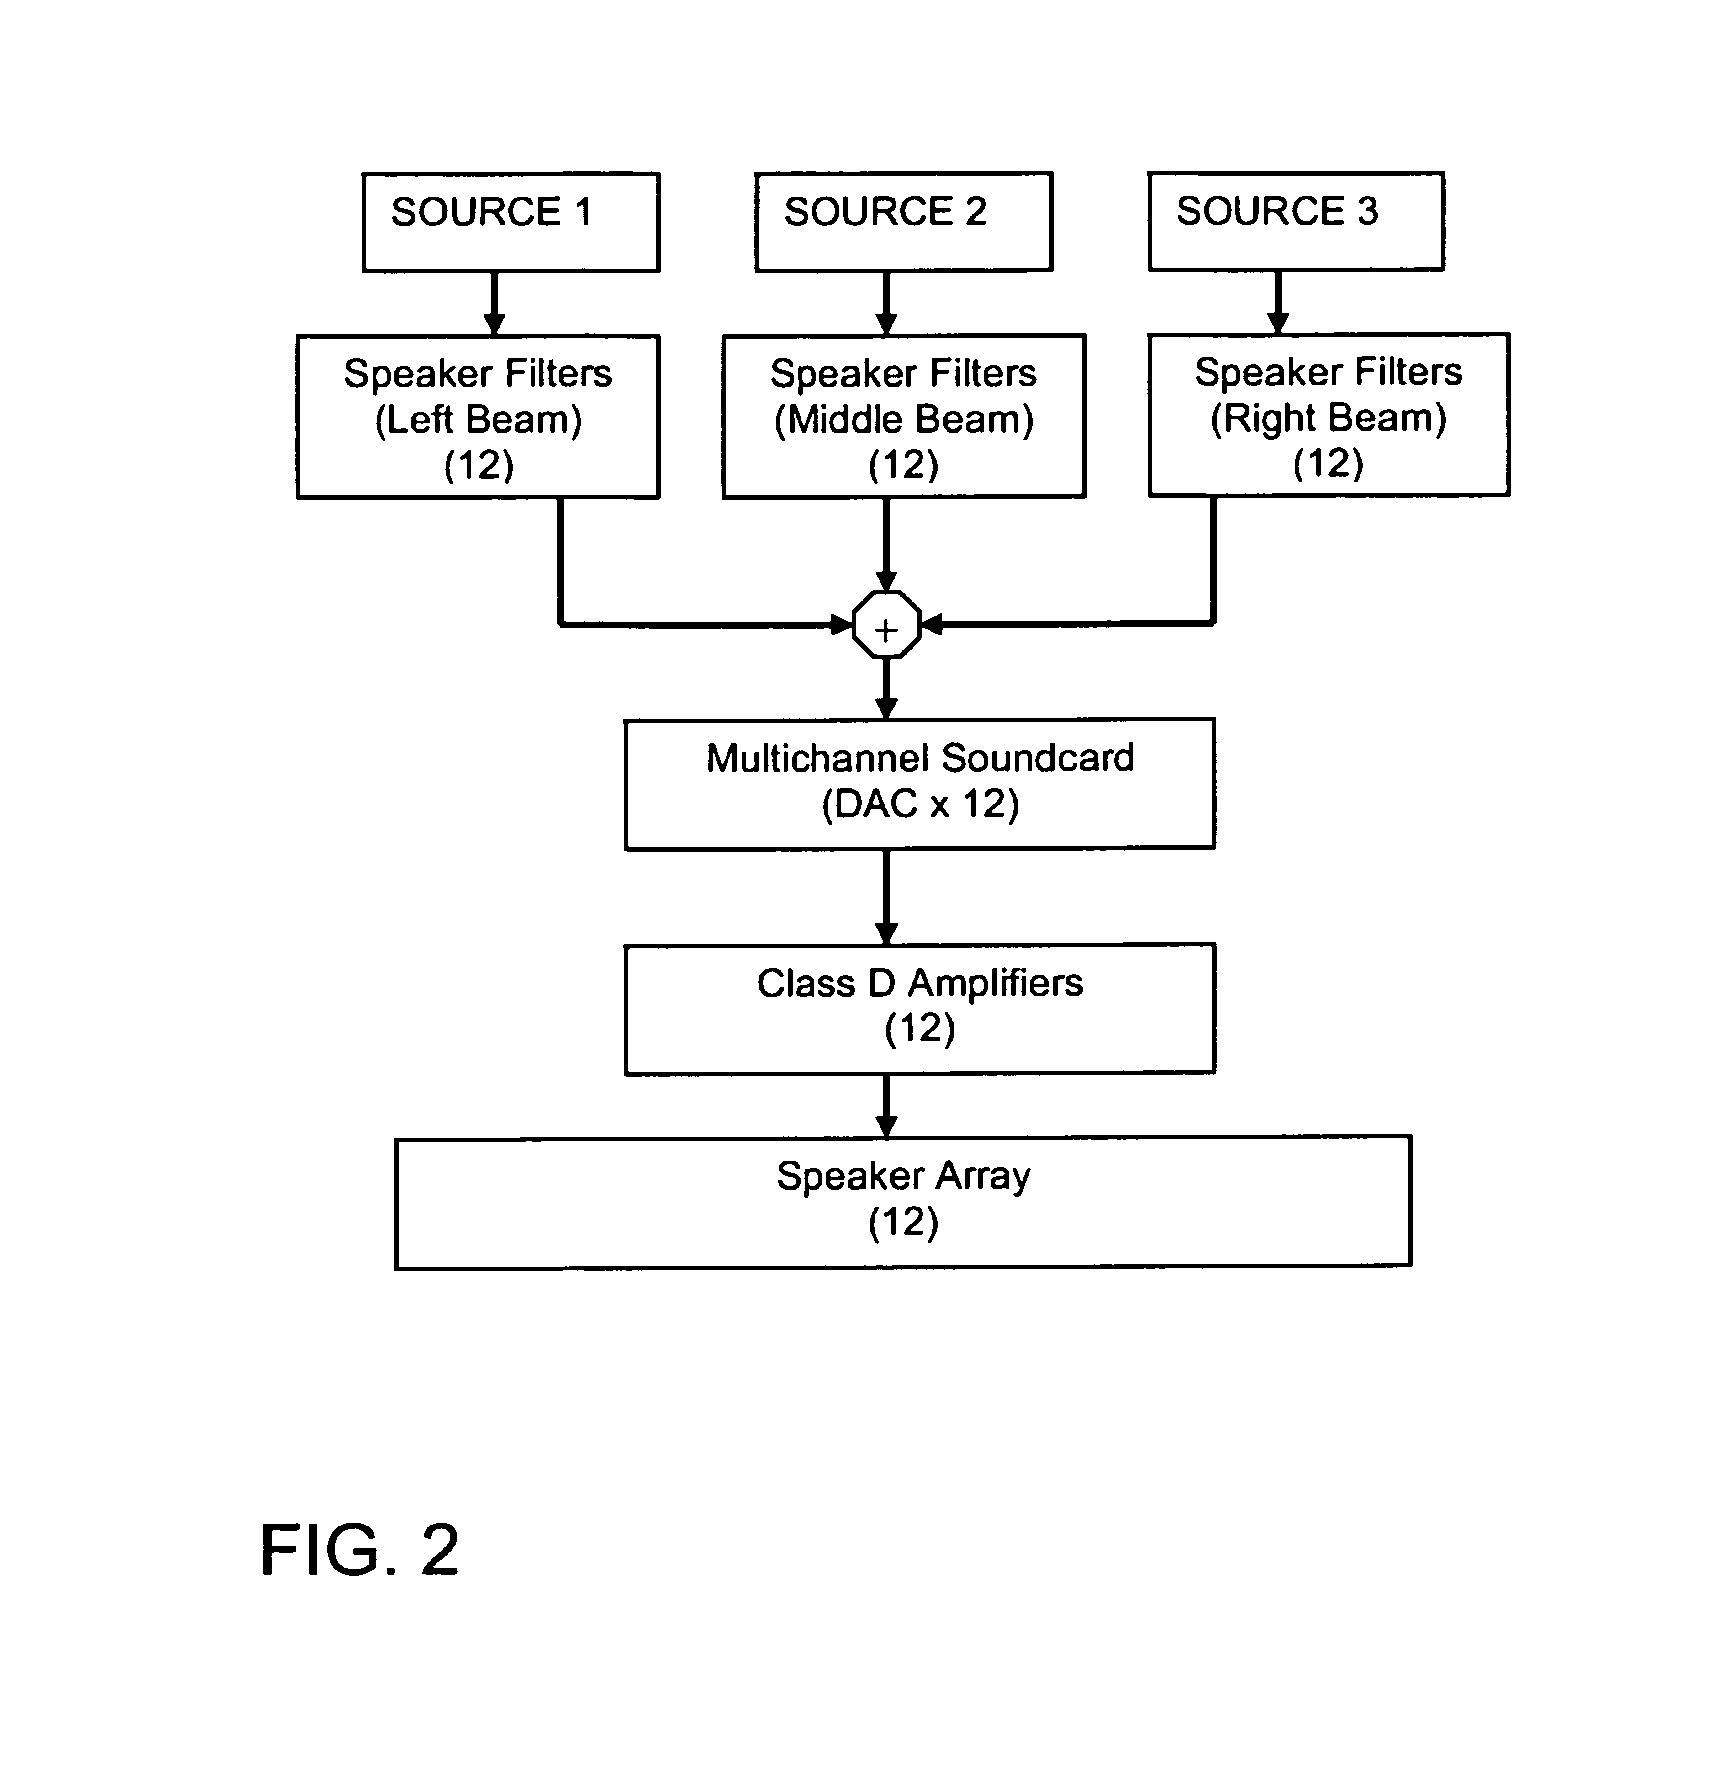 Method for controlling a speaker array to provide spatialized, localized, and binaural virtual surround sound